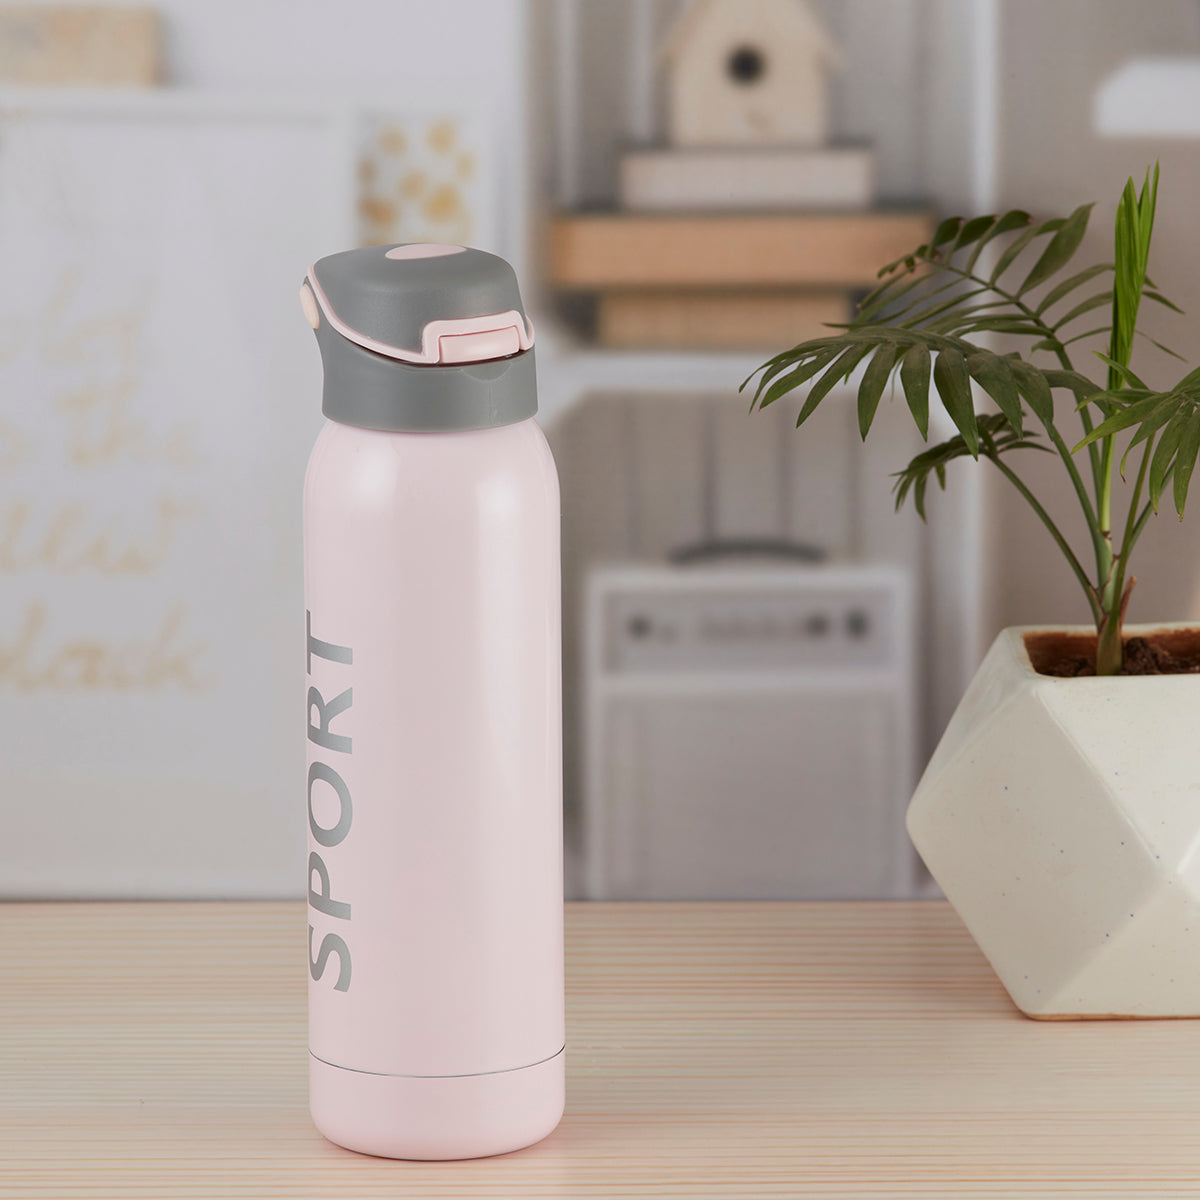 Stainless Steel Vacuum Insulated double wall Water Bottle for Home, Office, Travel and Sports, Leak - proof Lid for Hot and Cold liquids - 500ml (7362)